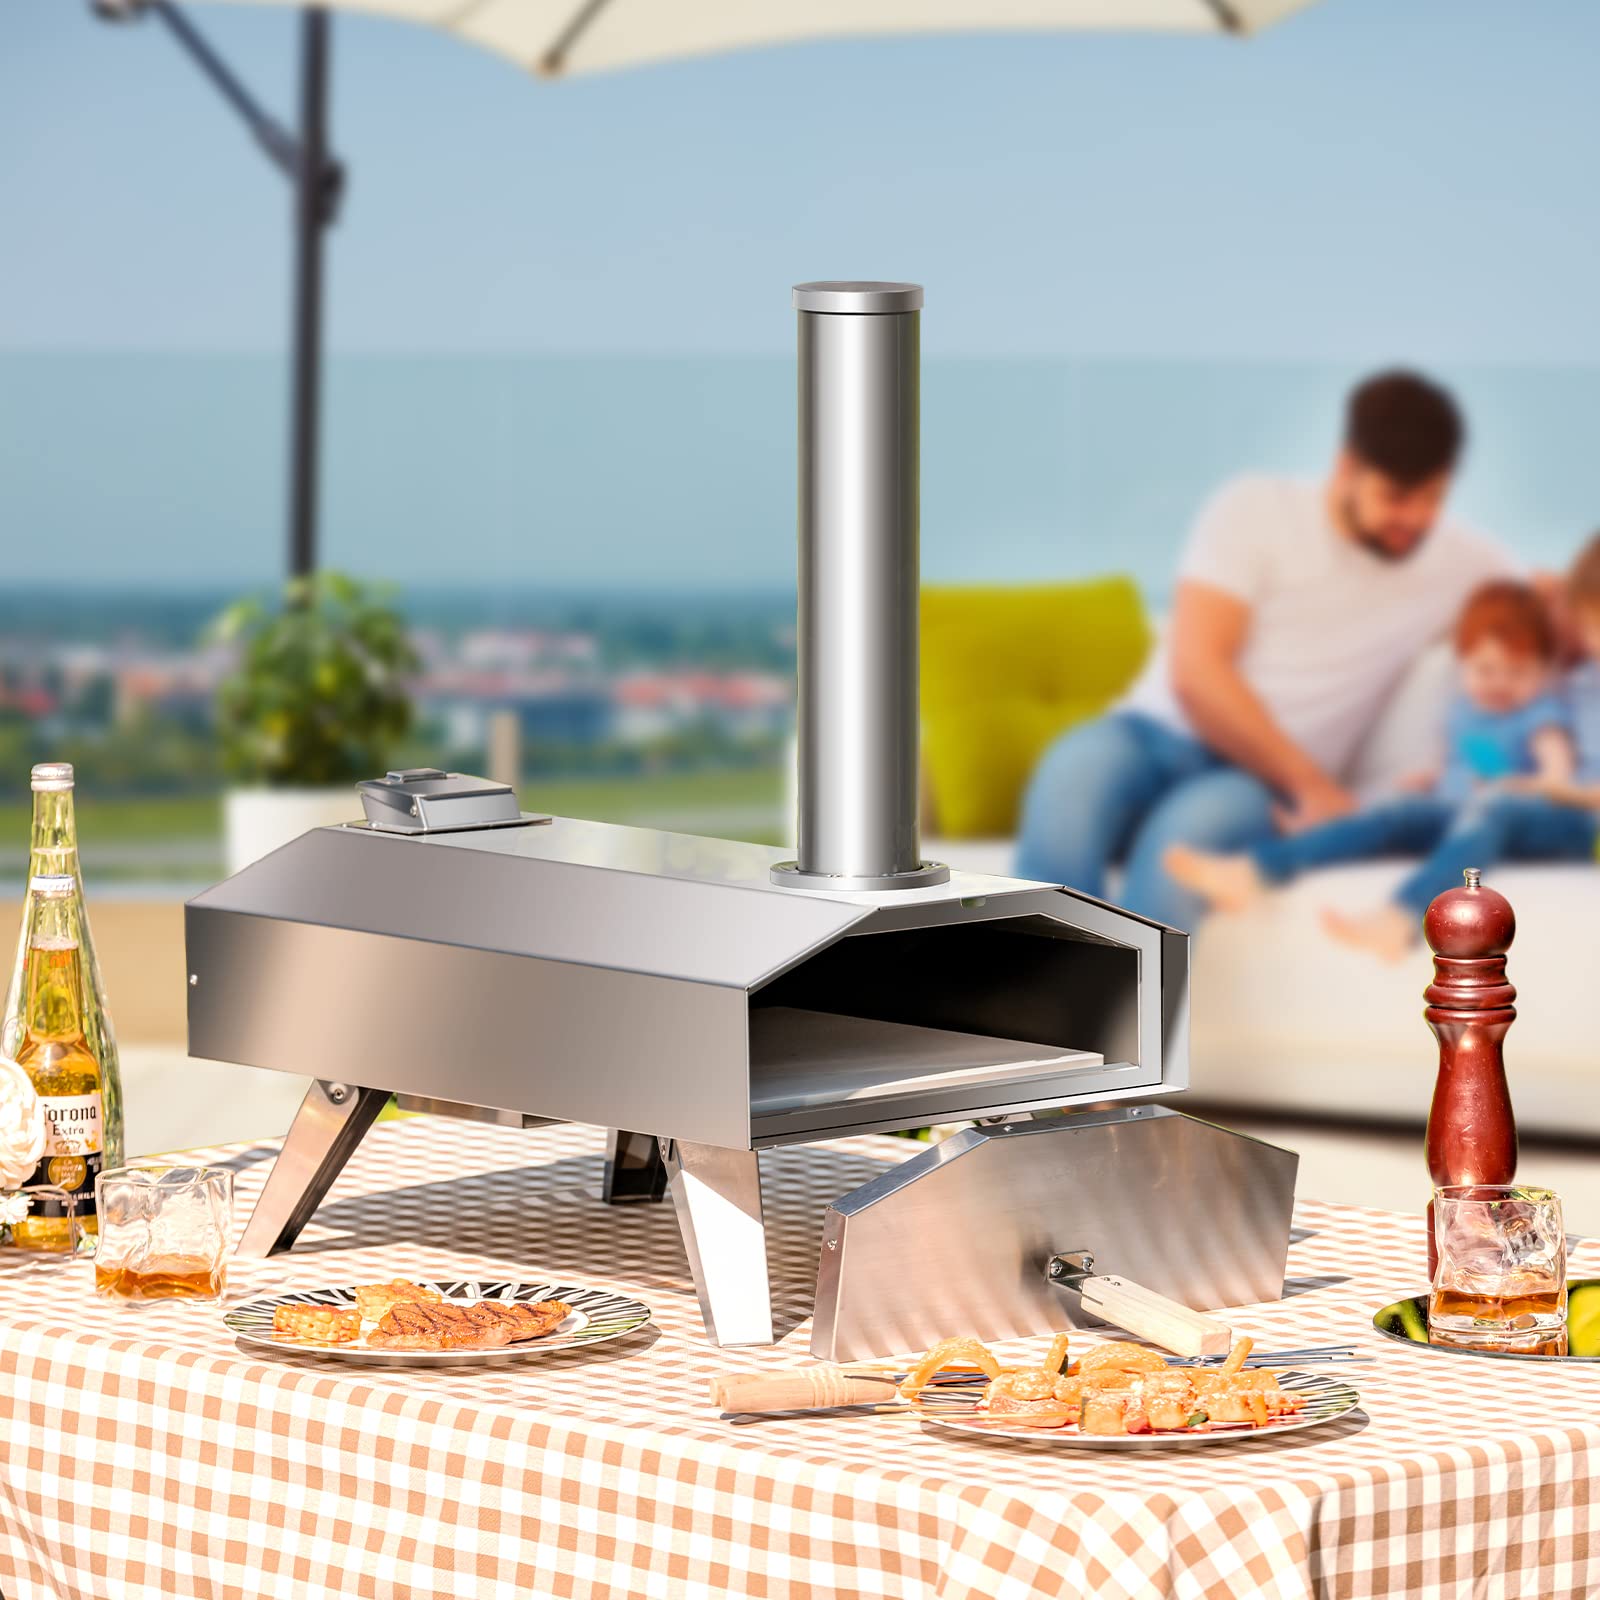 Giantex Outdoor Pizza Oven with 12'' Pizza Stone, Foldable Legs, Portable Stainless Steel Steel Pizza Maker for Outside